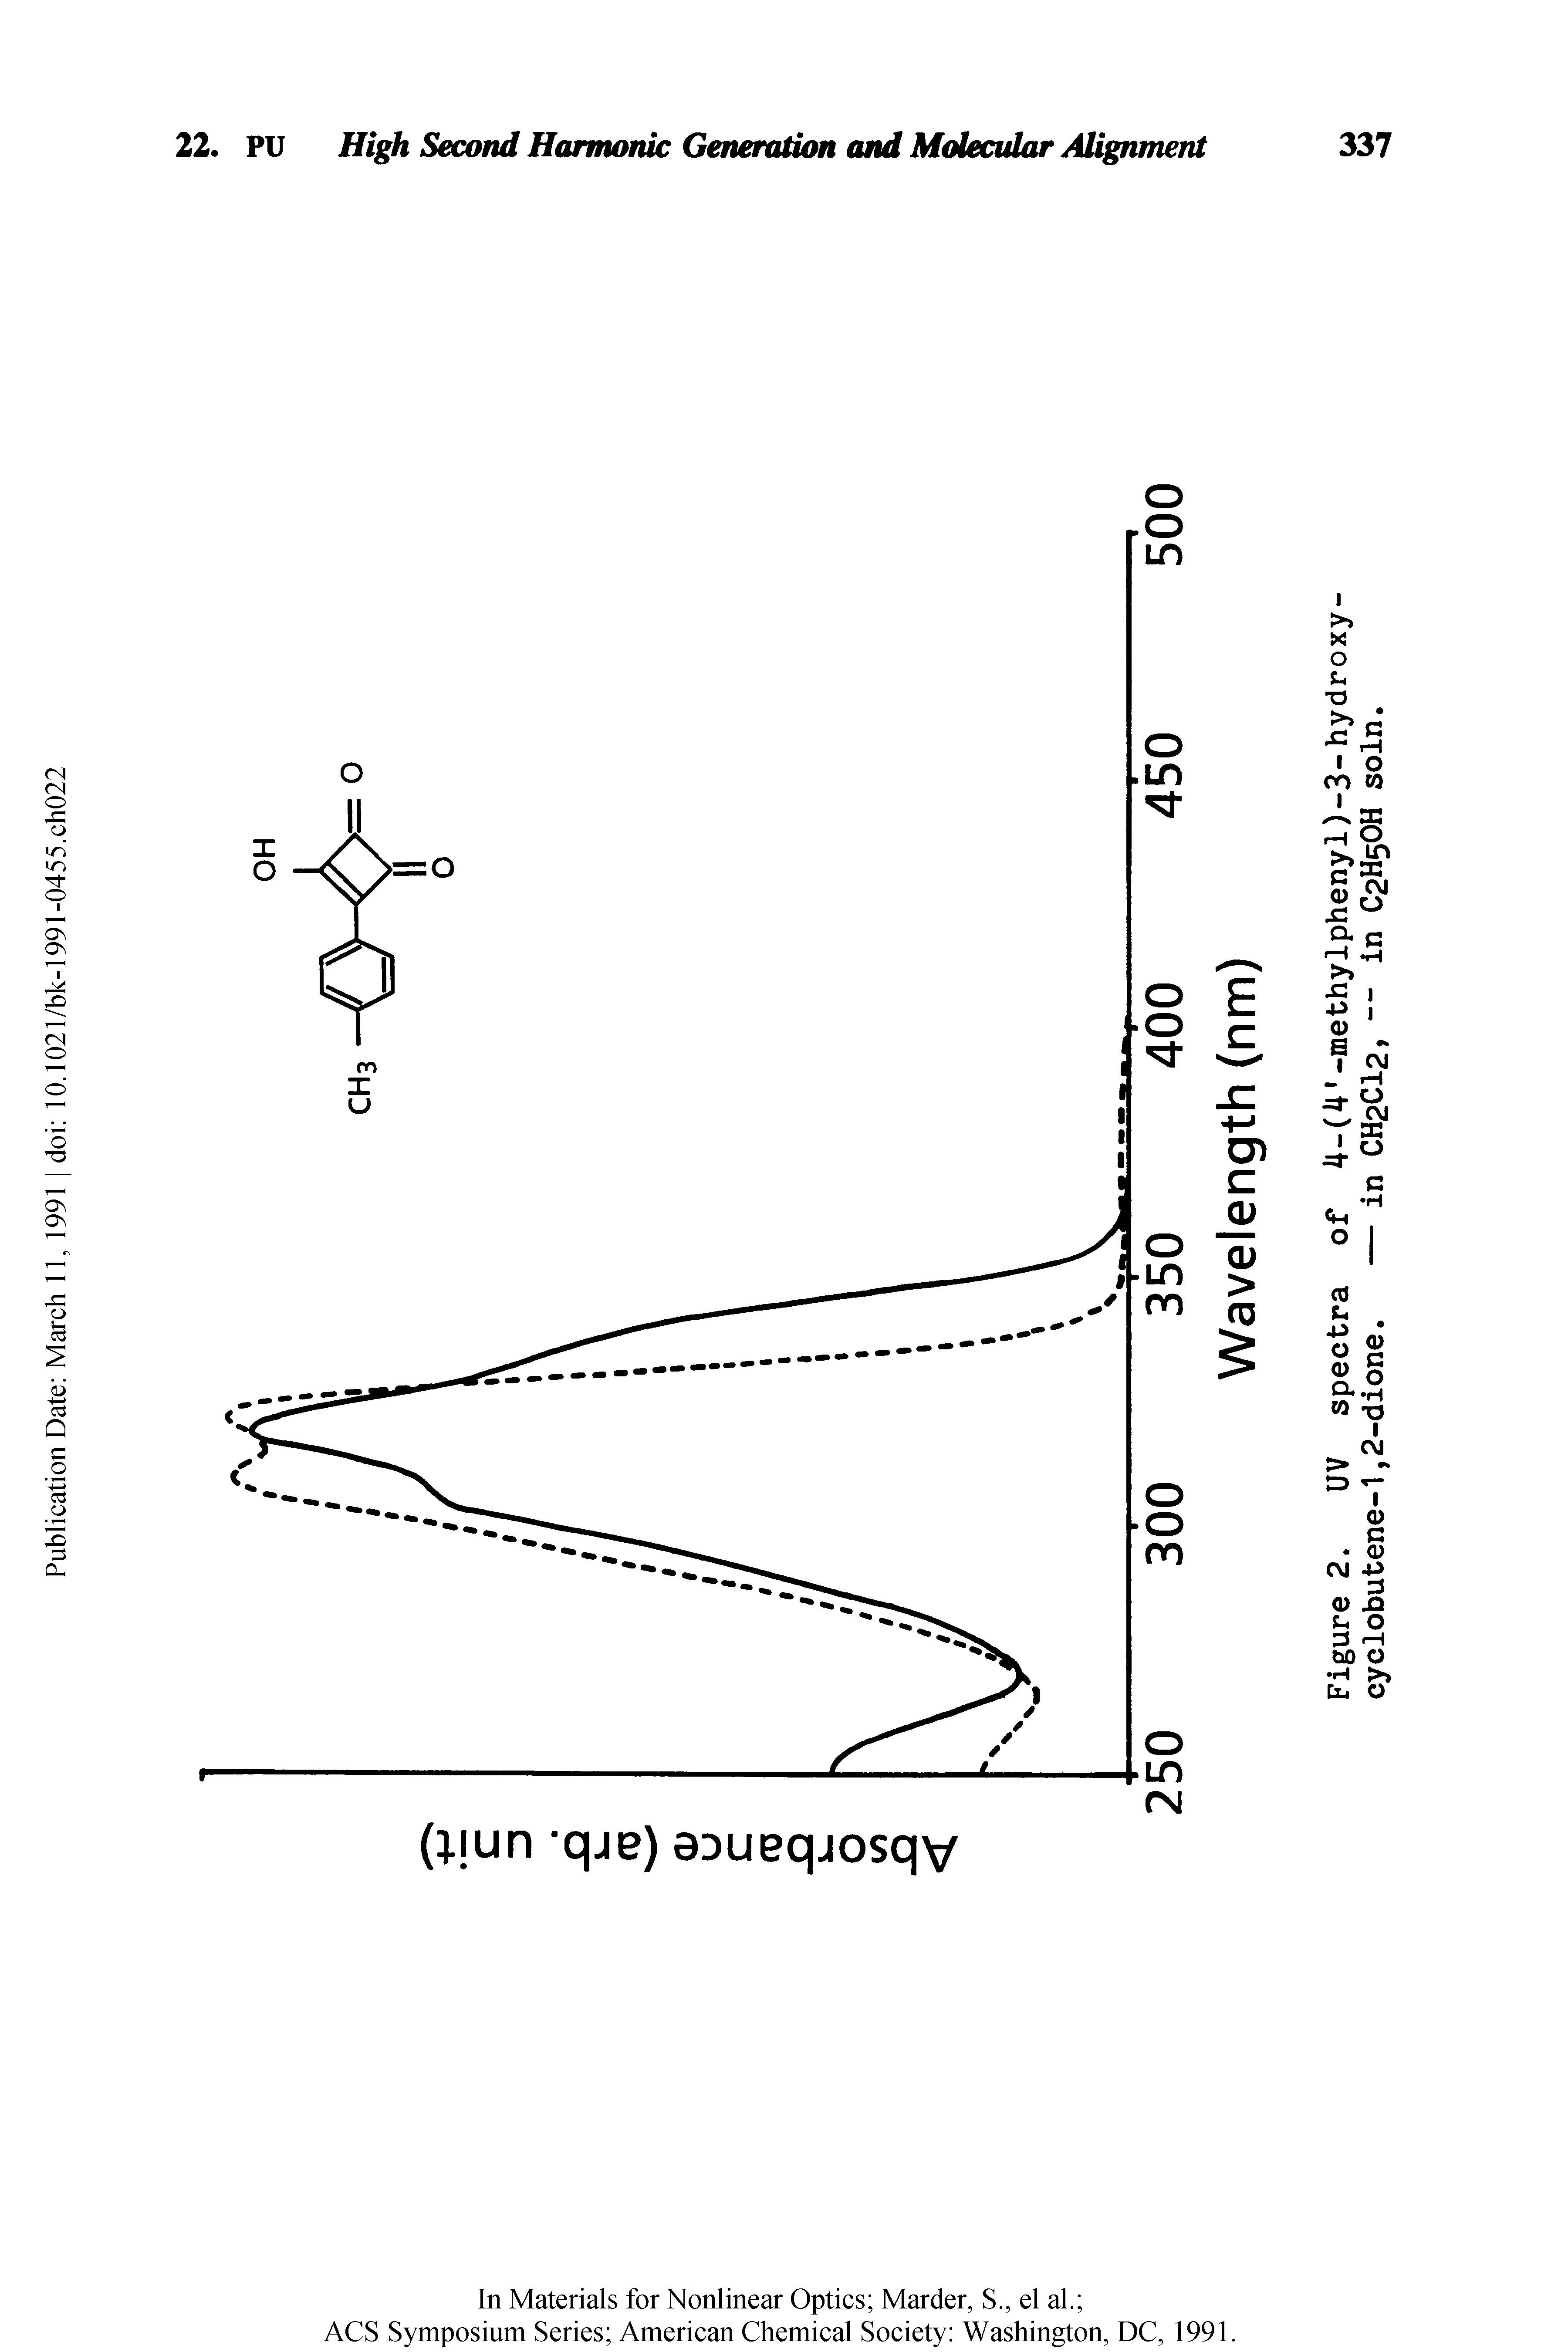 Figure 2. UV spectra of 4-(4 -methylphenyl)-3-hydroxy-cyclobutene- 1,2-dione. — in CH2CI2, — in C2H5OH soln.